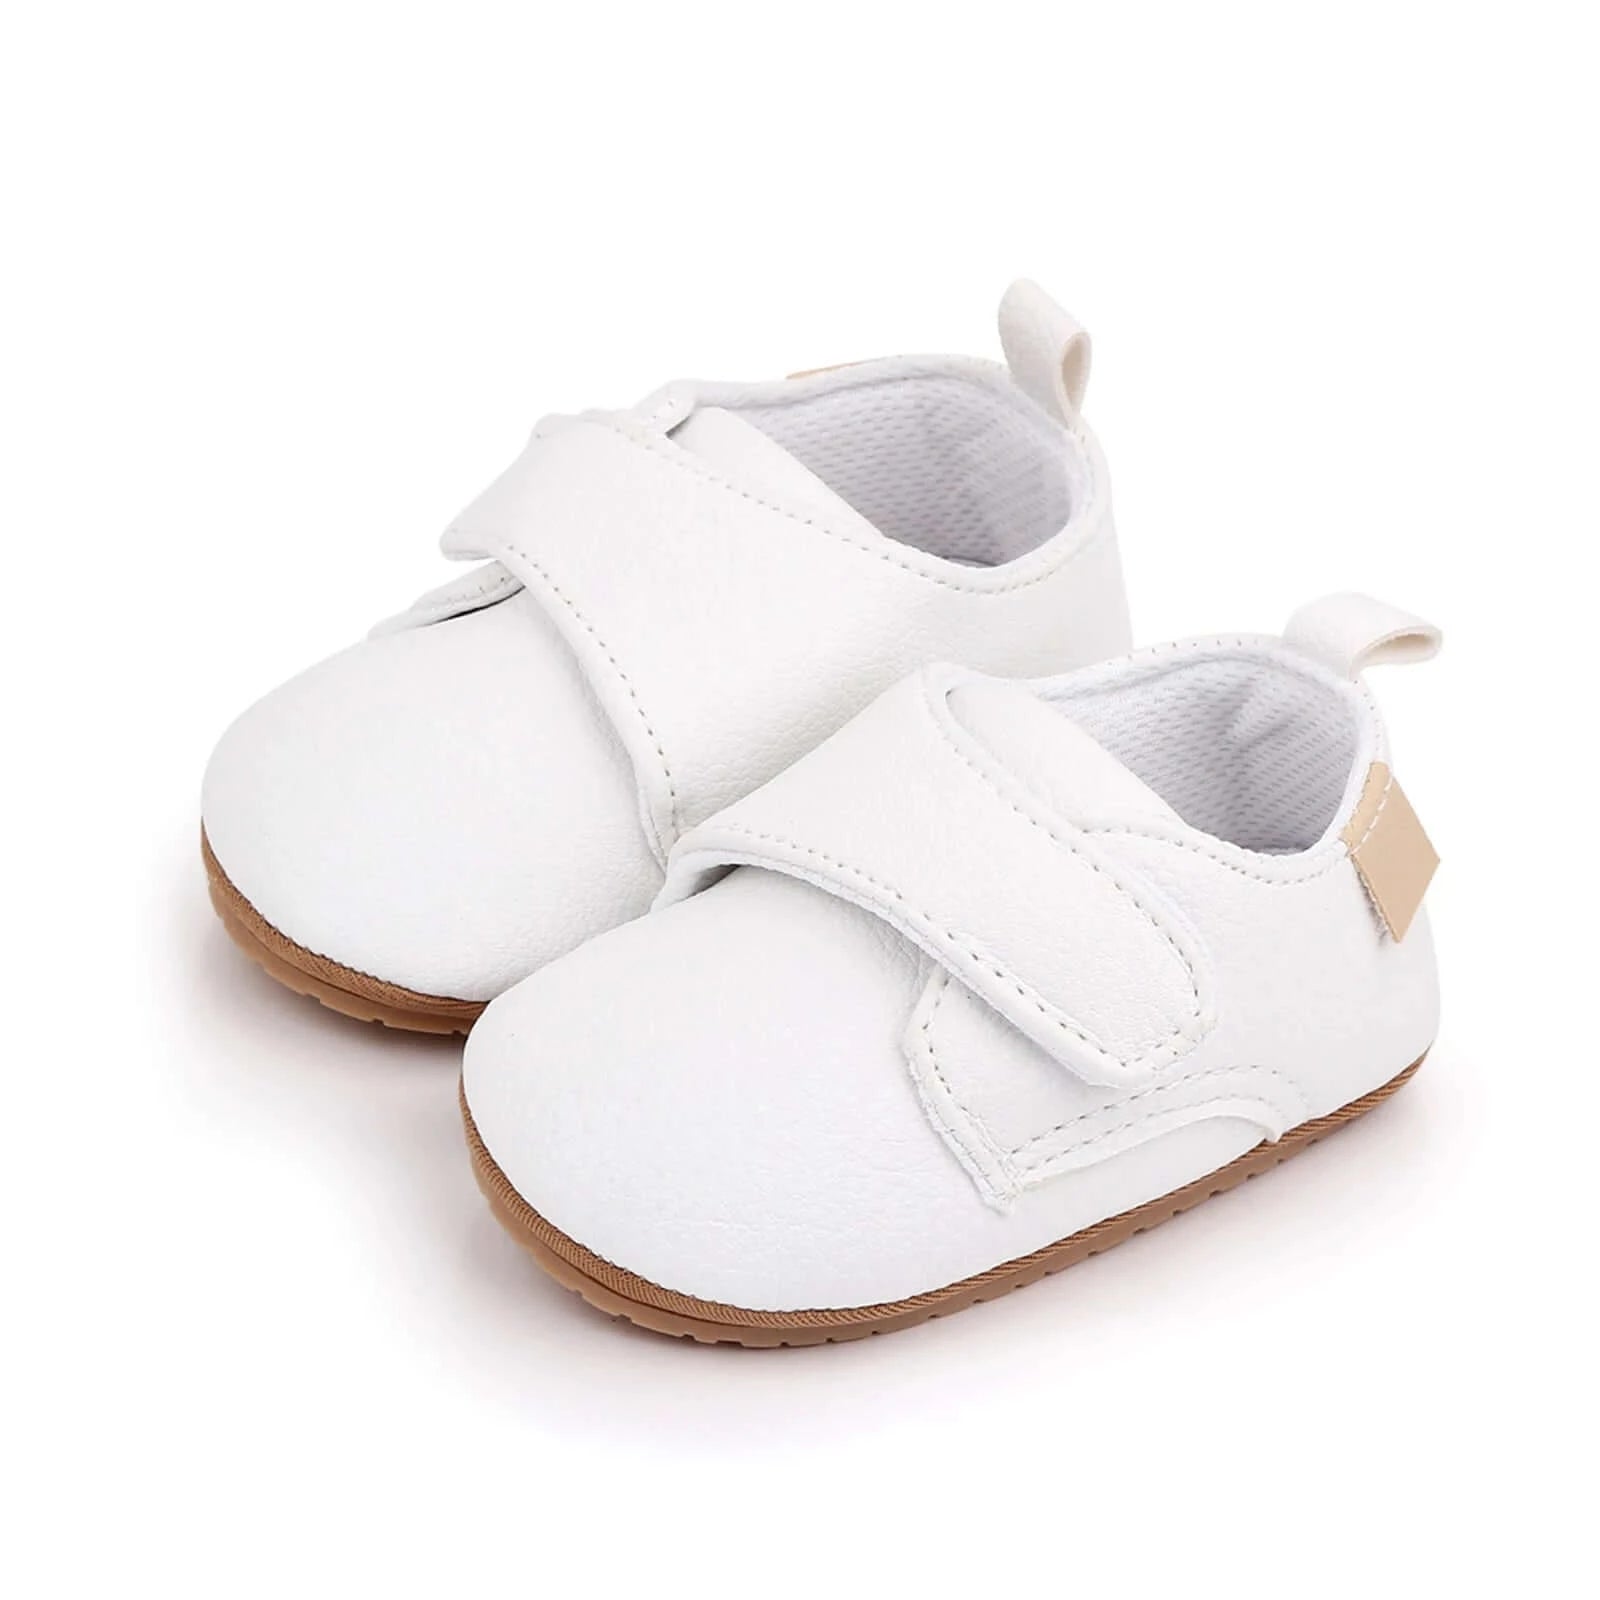 Image of Casual Baby Leather Shoes - Soft & Durable - Perfect for First Walkers. Shop now at OleOle.